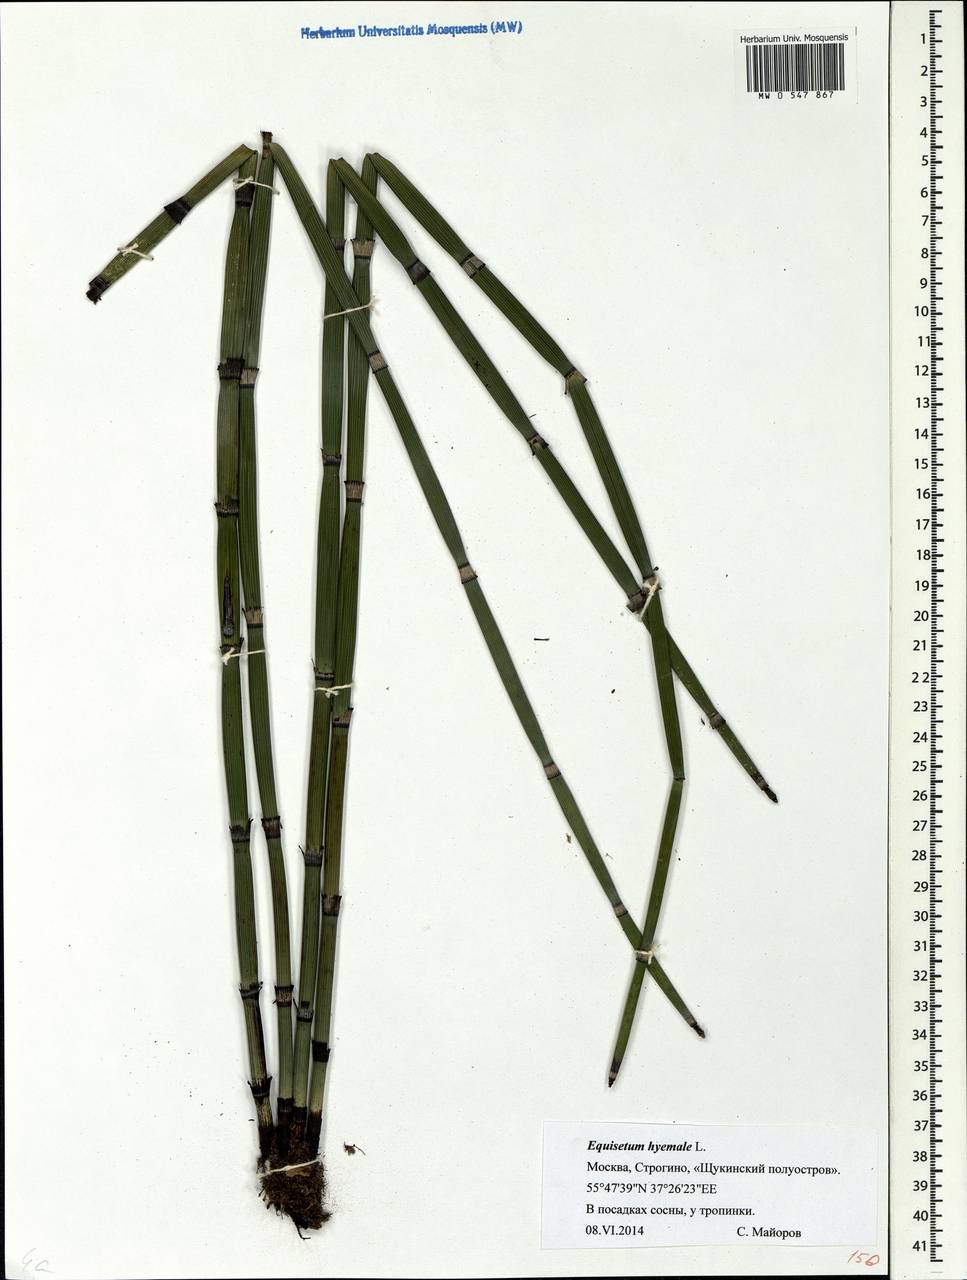 Equisetum hyemale L., Eastern Europe, Moscow region (E4a) (Russia)